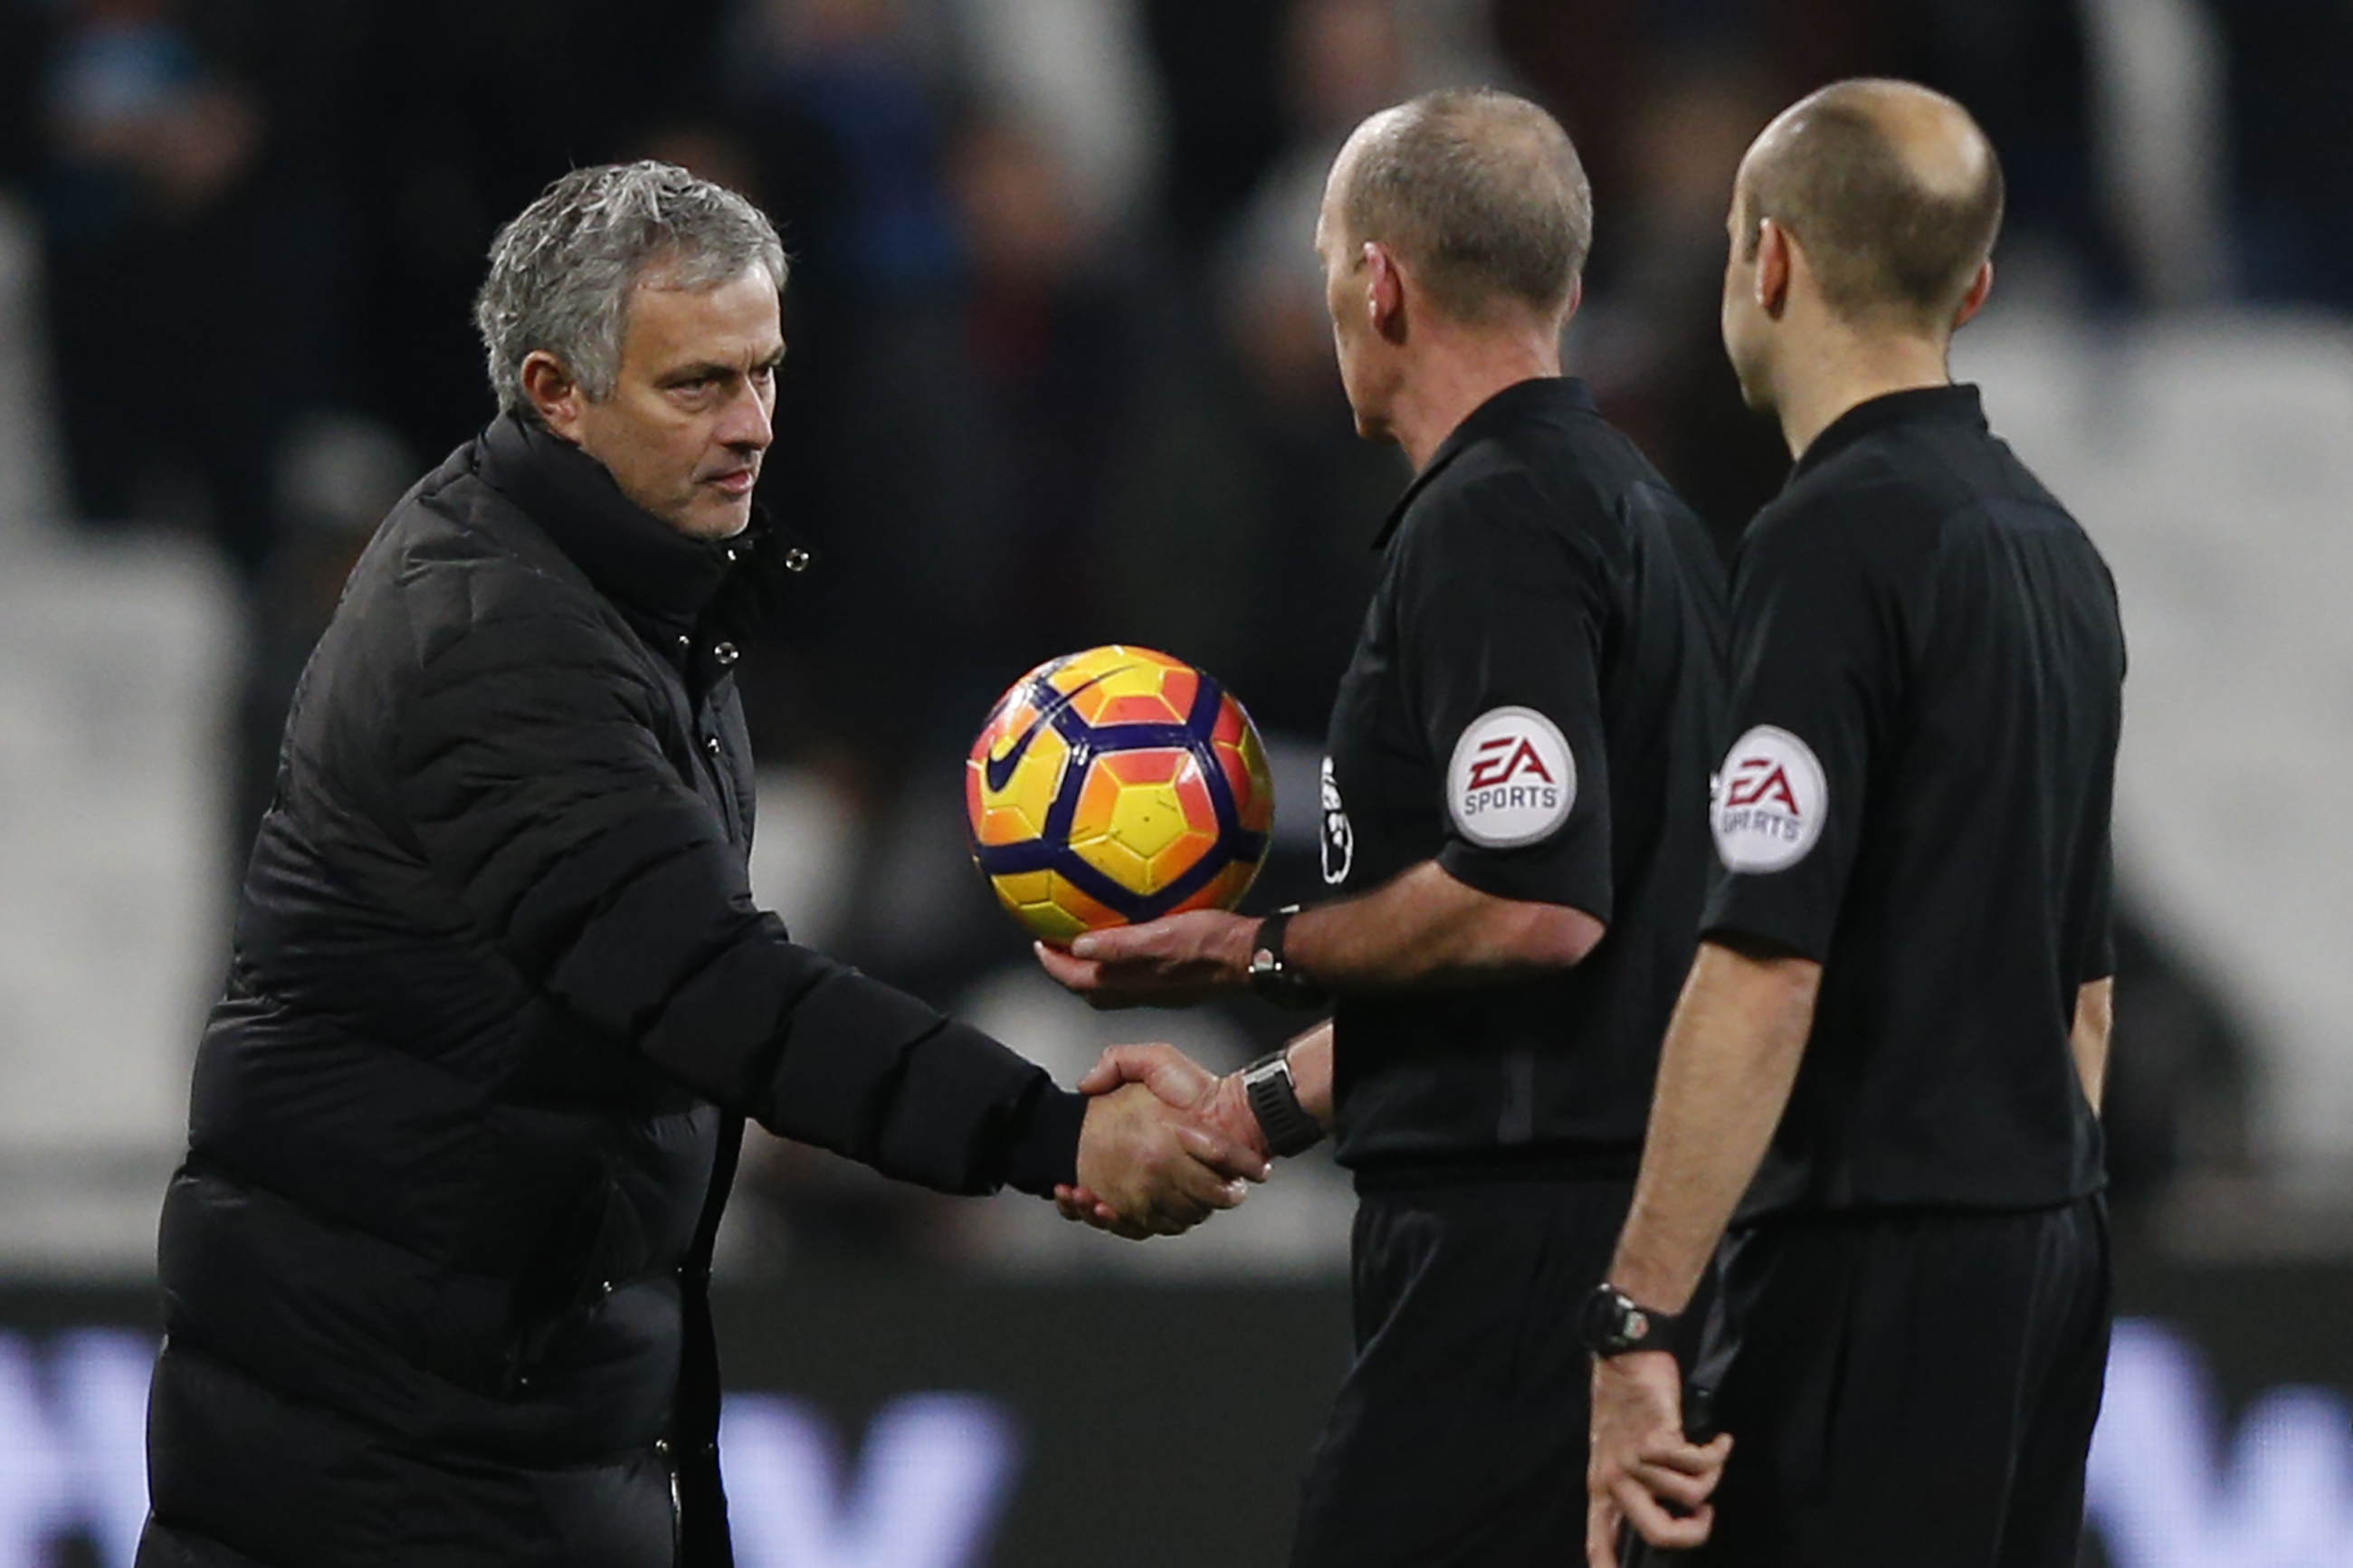 Manchester United's Portuguese manager Jose Mourinho (L) shakes hands with referee Mike Dean on the pitch after the English Premier League football match between West Ham United and Manchester United at The London Stadium, in east London on January 2, 2017.
Manchester United won the game 2-0. / AFP / Adrian DENNIS / RESTRICTED TO EDITORIAL USE. No use with unauthorized audio, video, data, fixture lists, club/league logos or 'live' services. Online in-match use limited to 75 images, no video emulation. No use in betting, games or single club/league/player publications.  /         (Photo credit should read ADRIAN DENNIS/AFP/Getty Images)